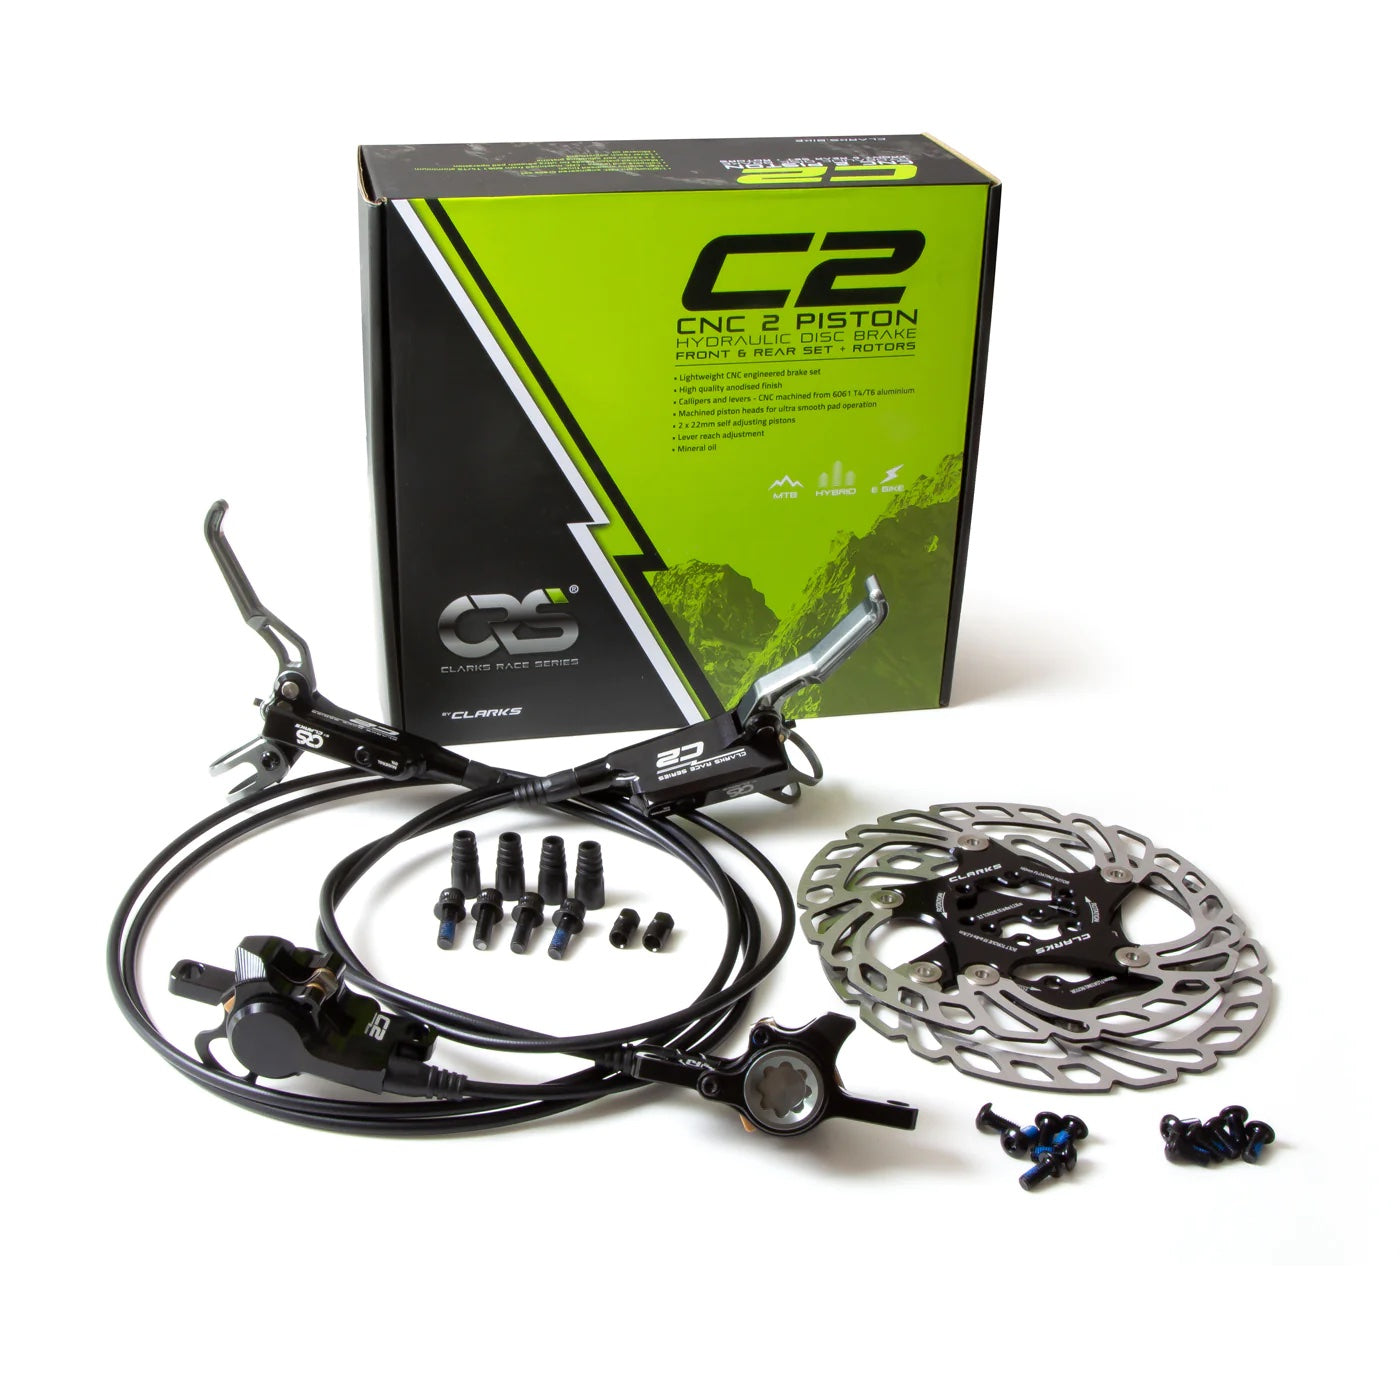 This Clarks C2 CNC Front and Rear Disc Brake Kit is designed for mountain bikes and features adjustable 2-piston callipers.